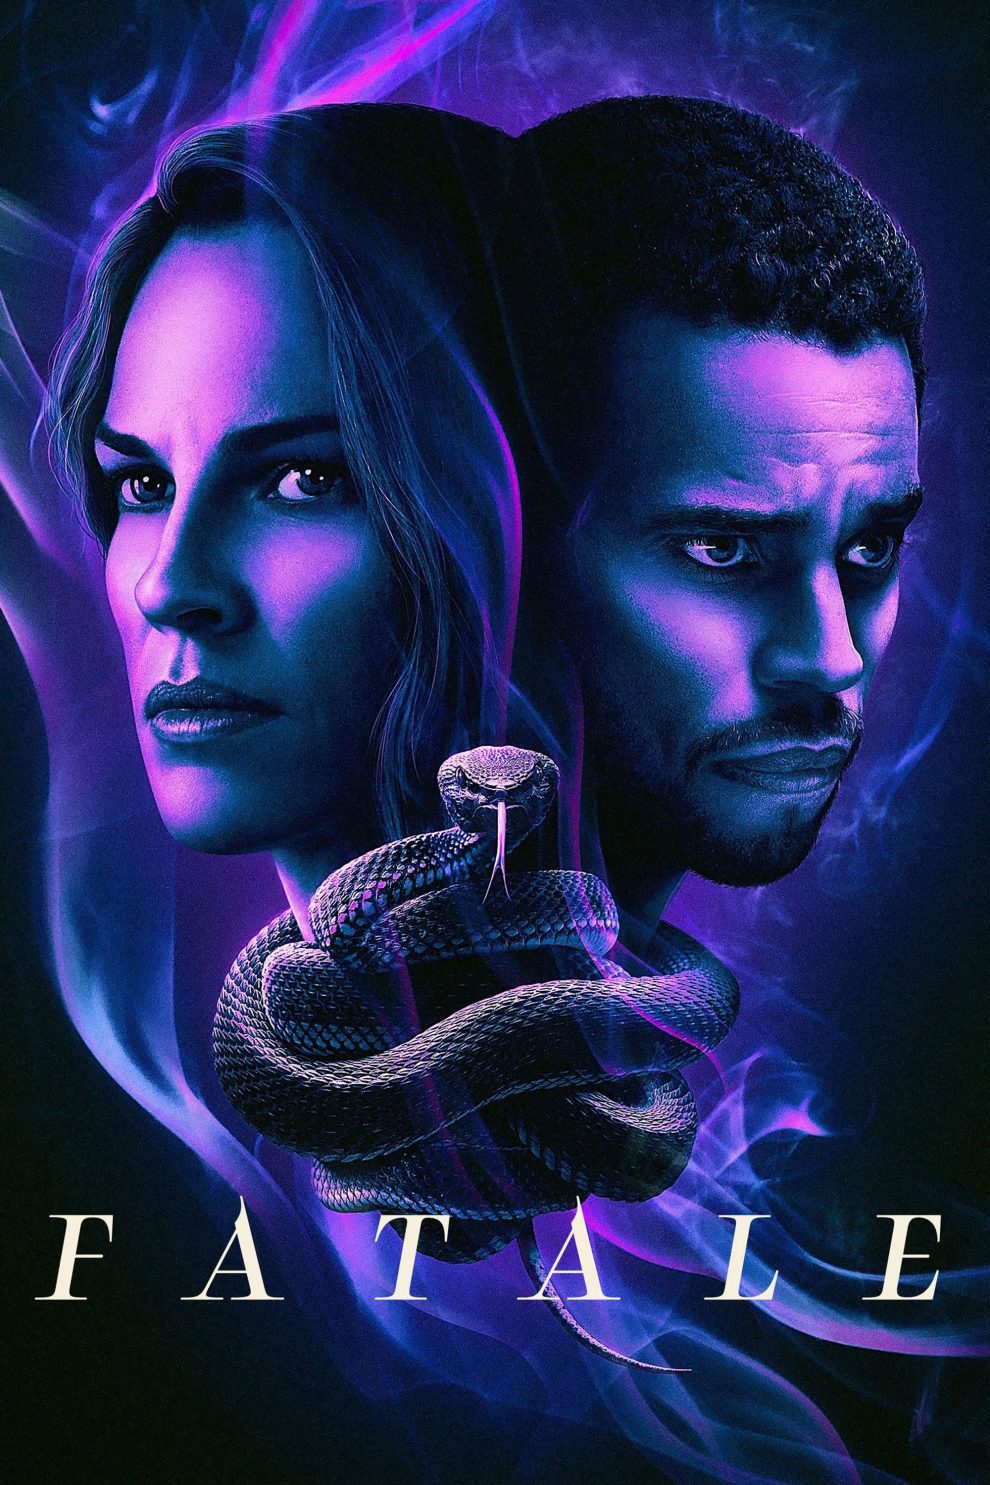 Poster for the movie "Fatale"